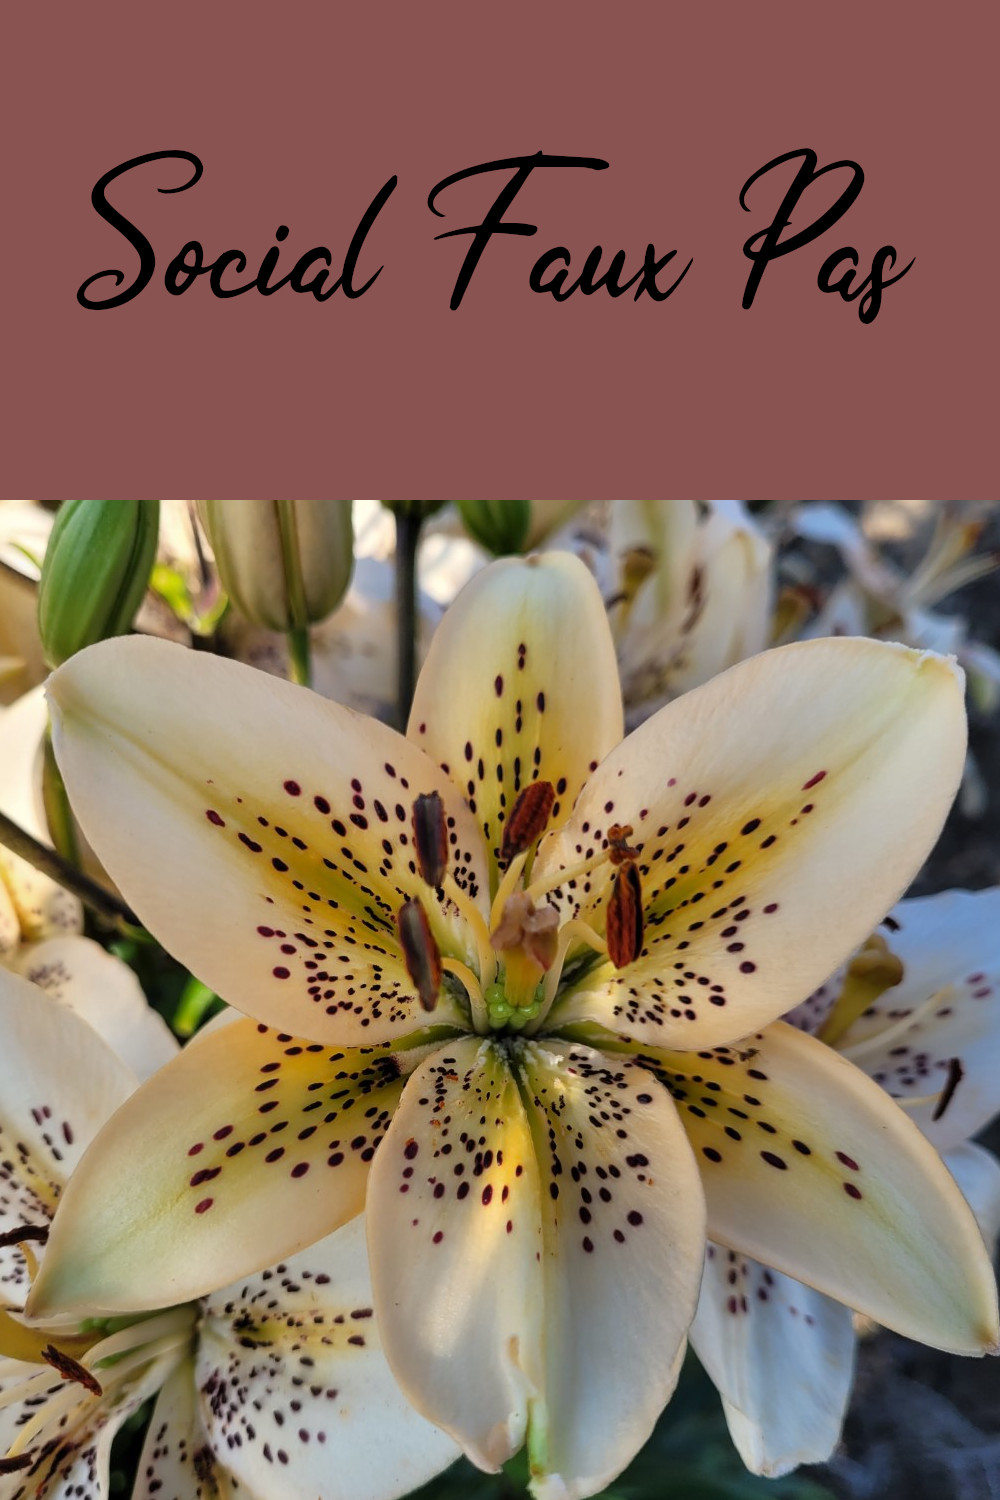 Social Faux Pas Spotted Asiatic lily bulb